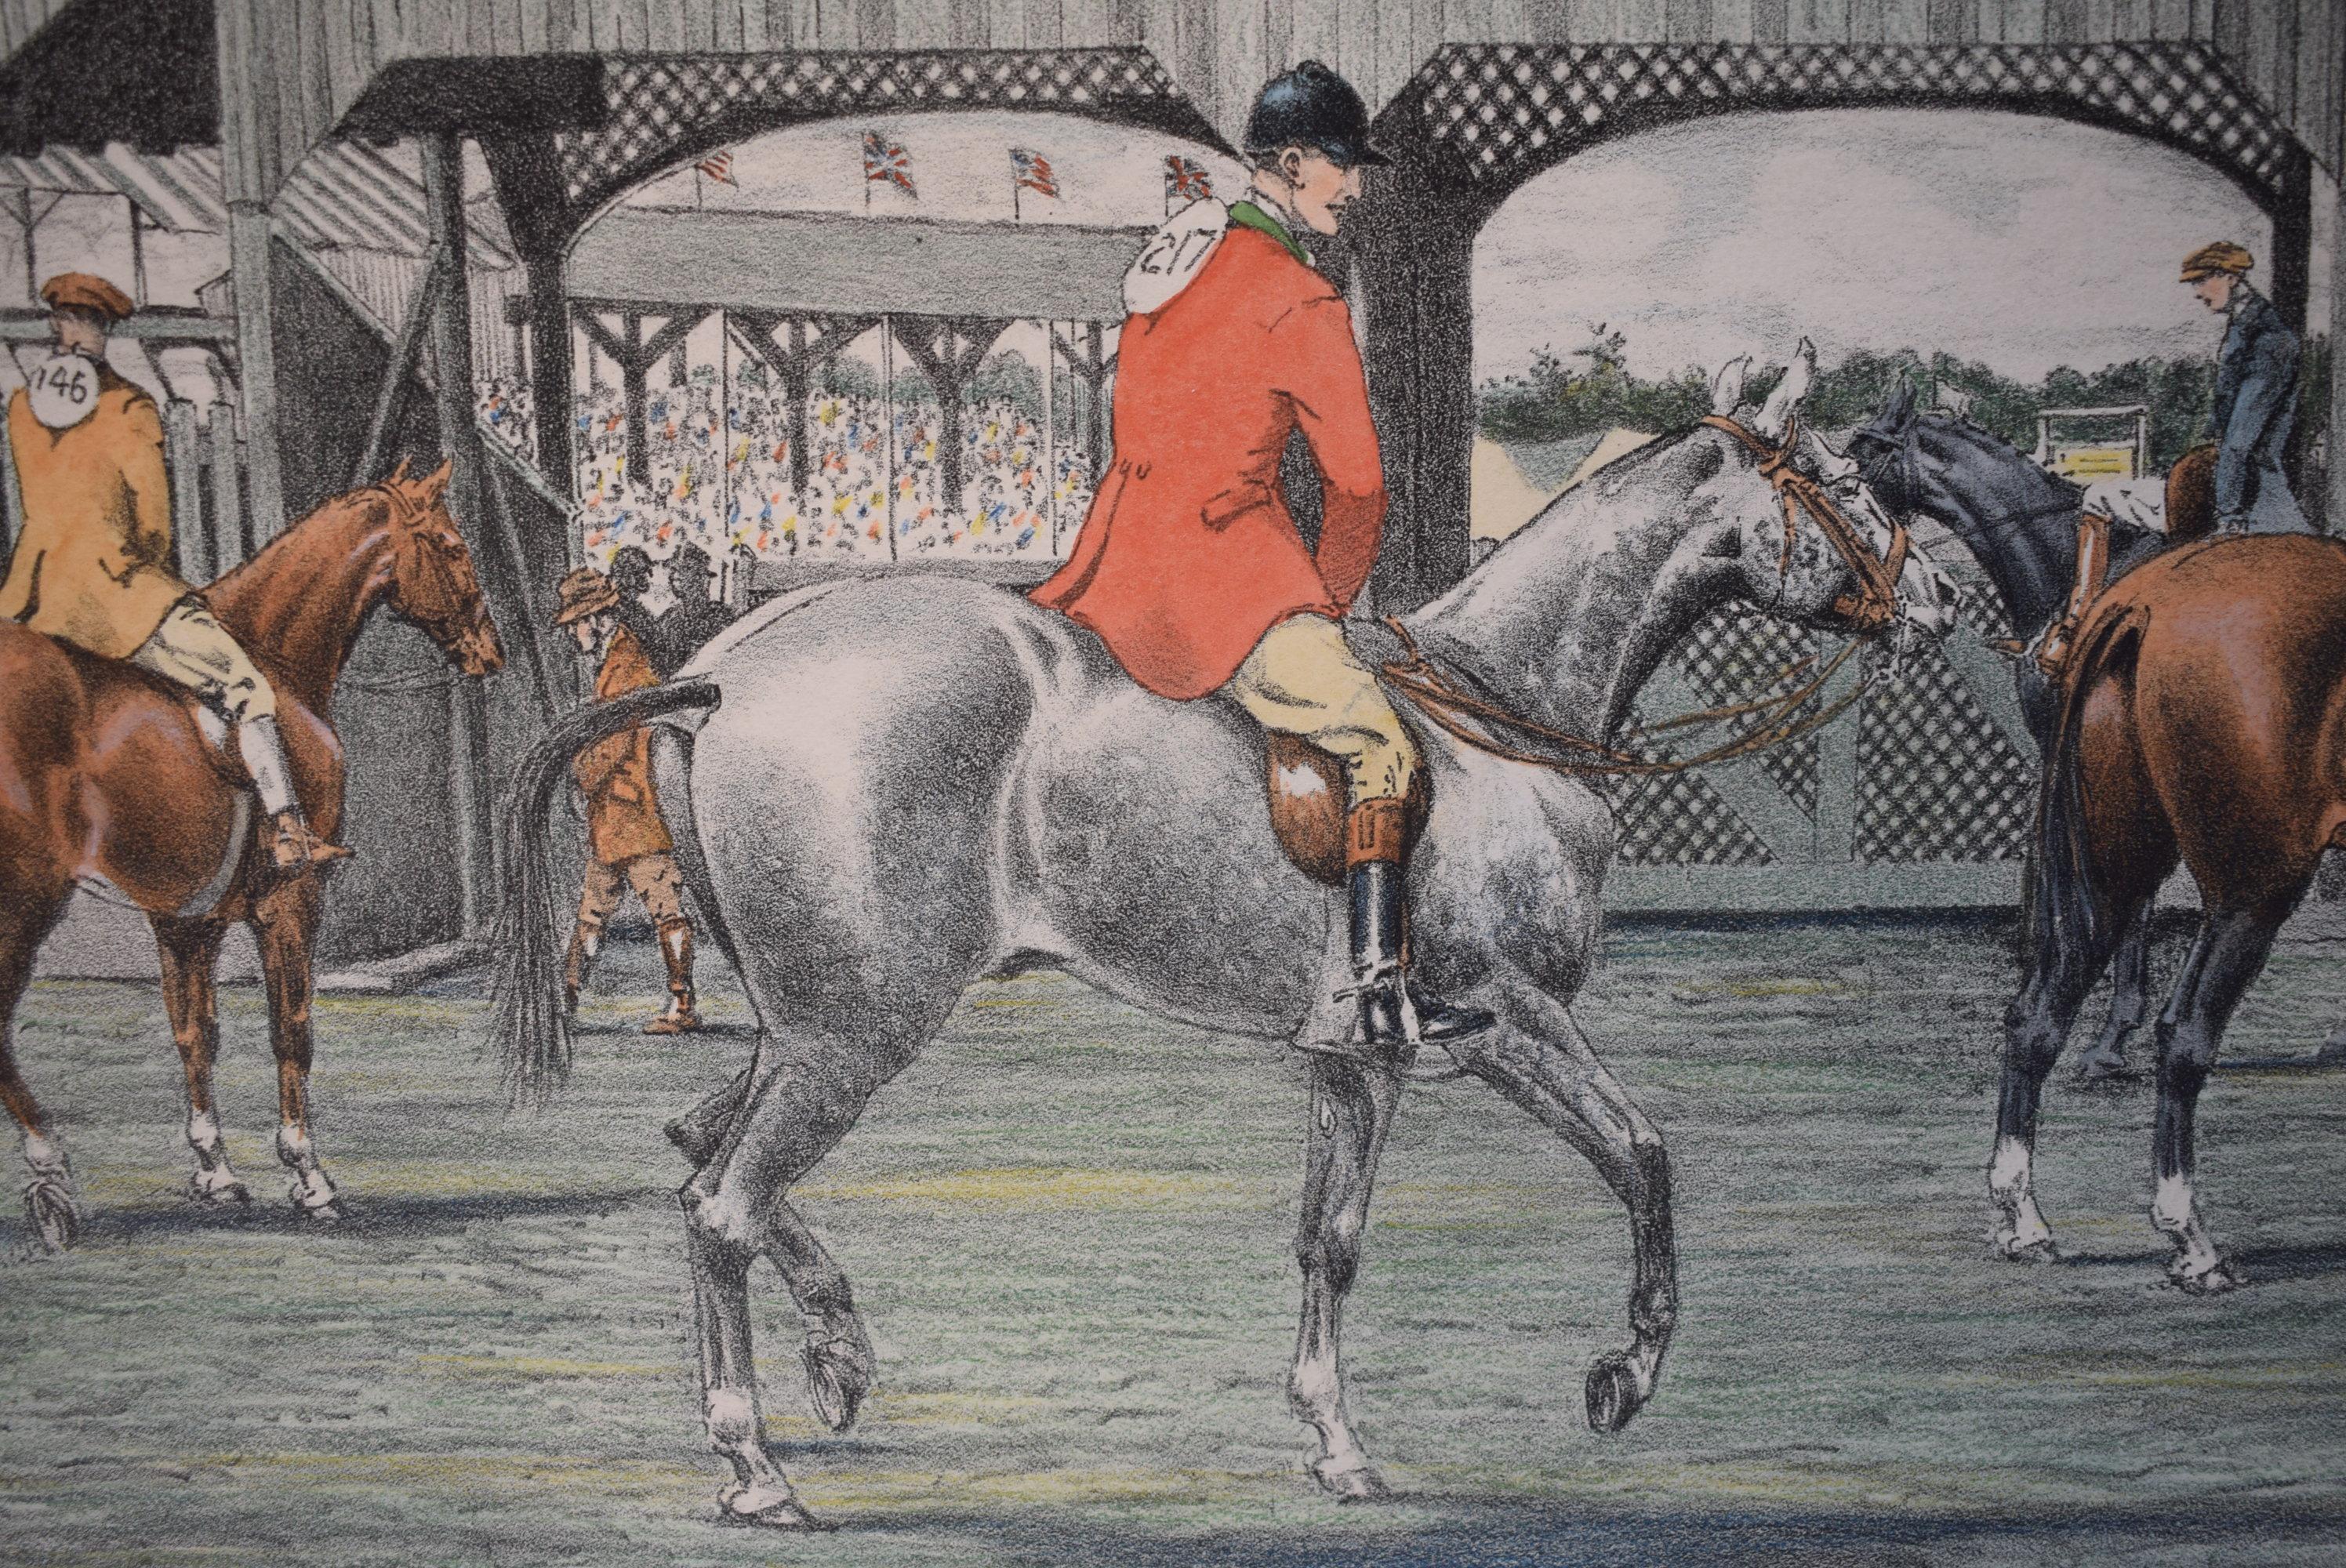 Edward King Lithographie „American Horse Show Scenes, Rochester“, Edward King im Angebot 4